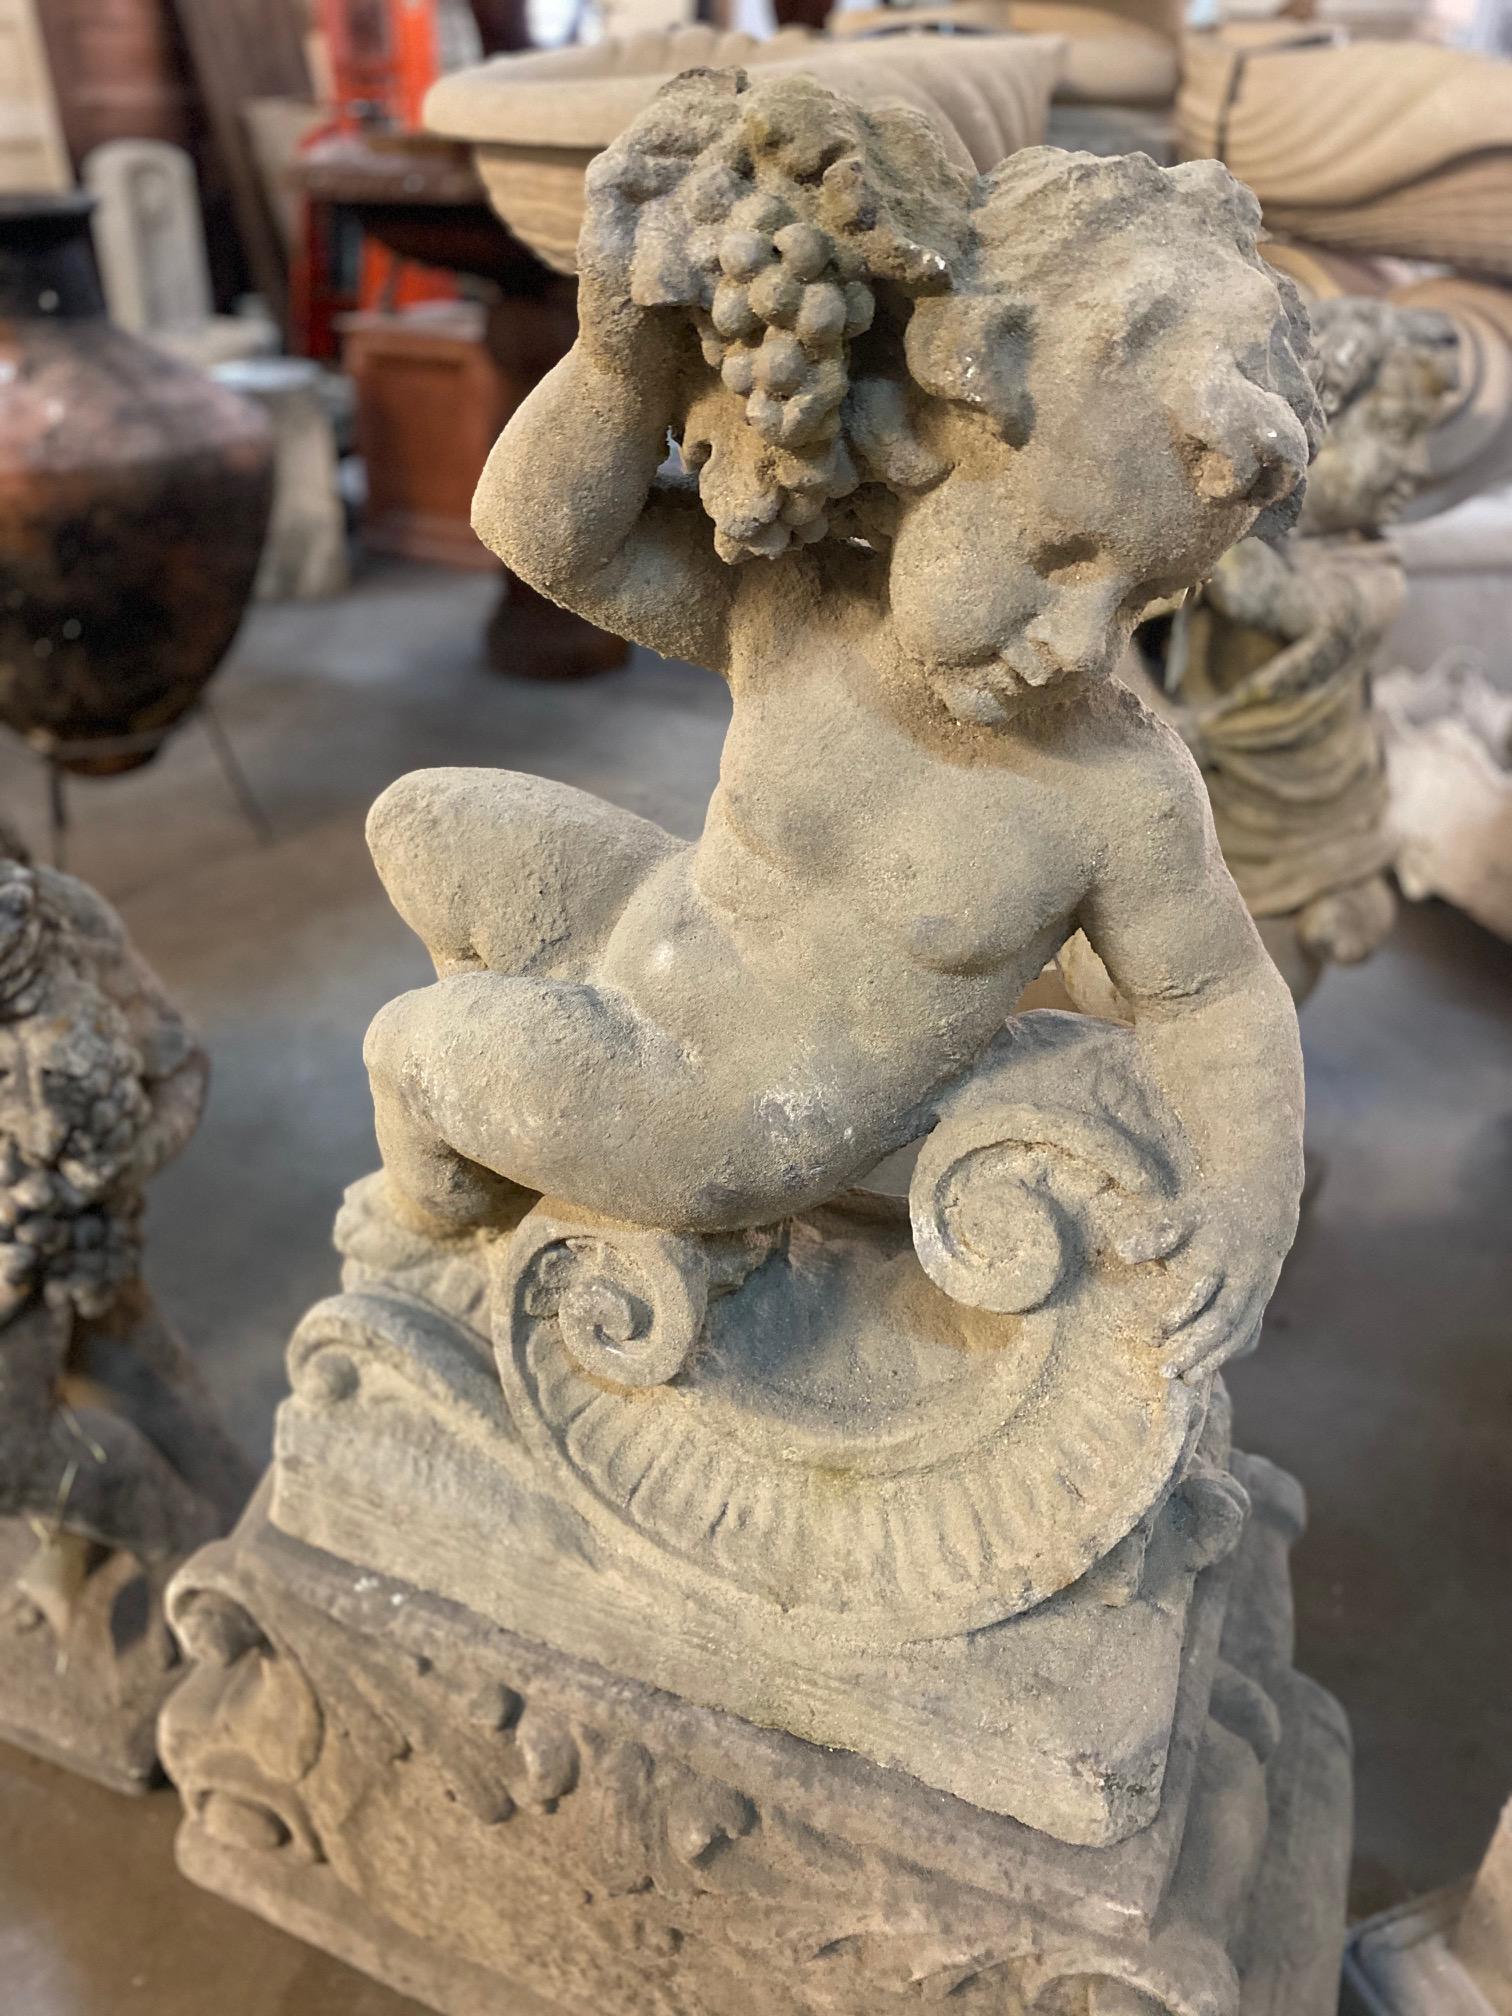 This statue is part of a Four Seasons Putti collection, this lounging putti statues with grapes represents 